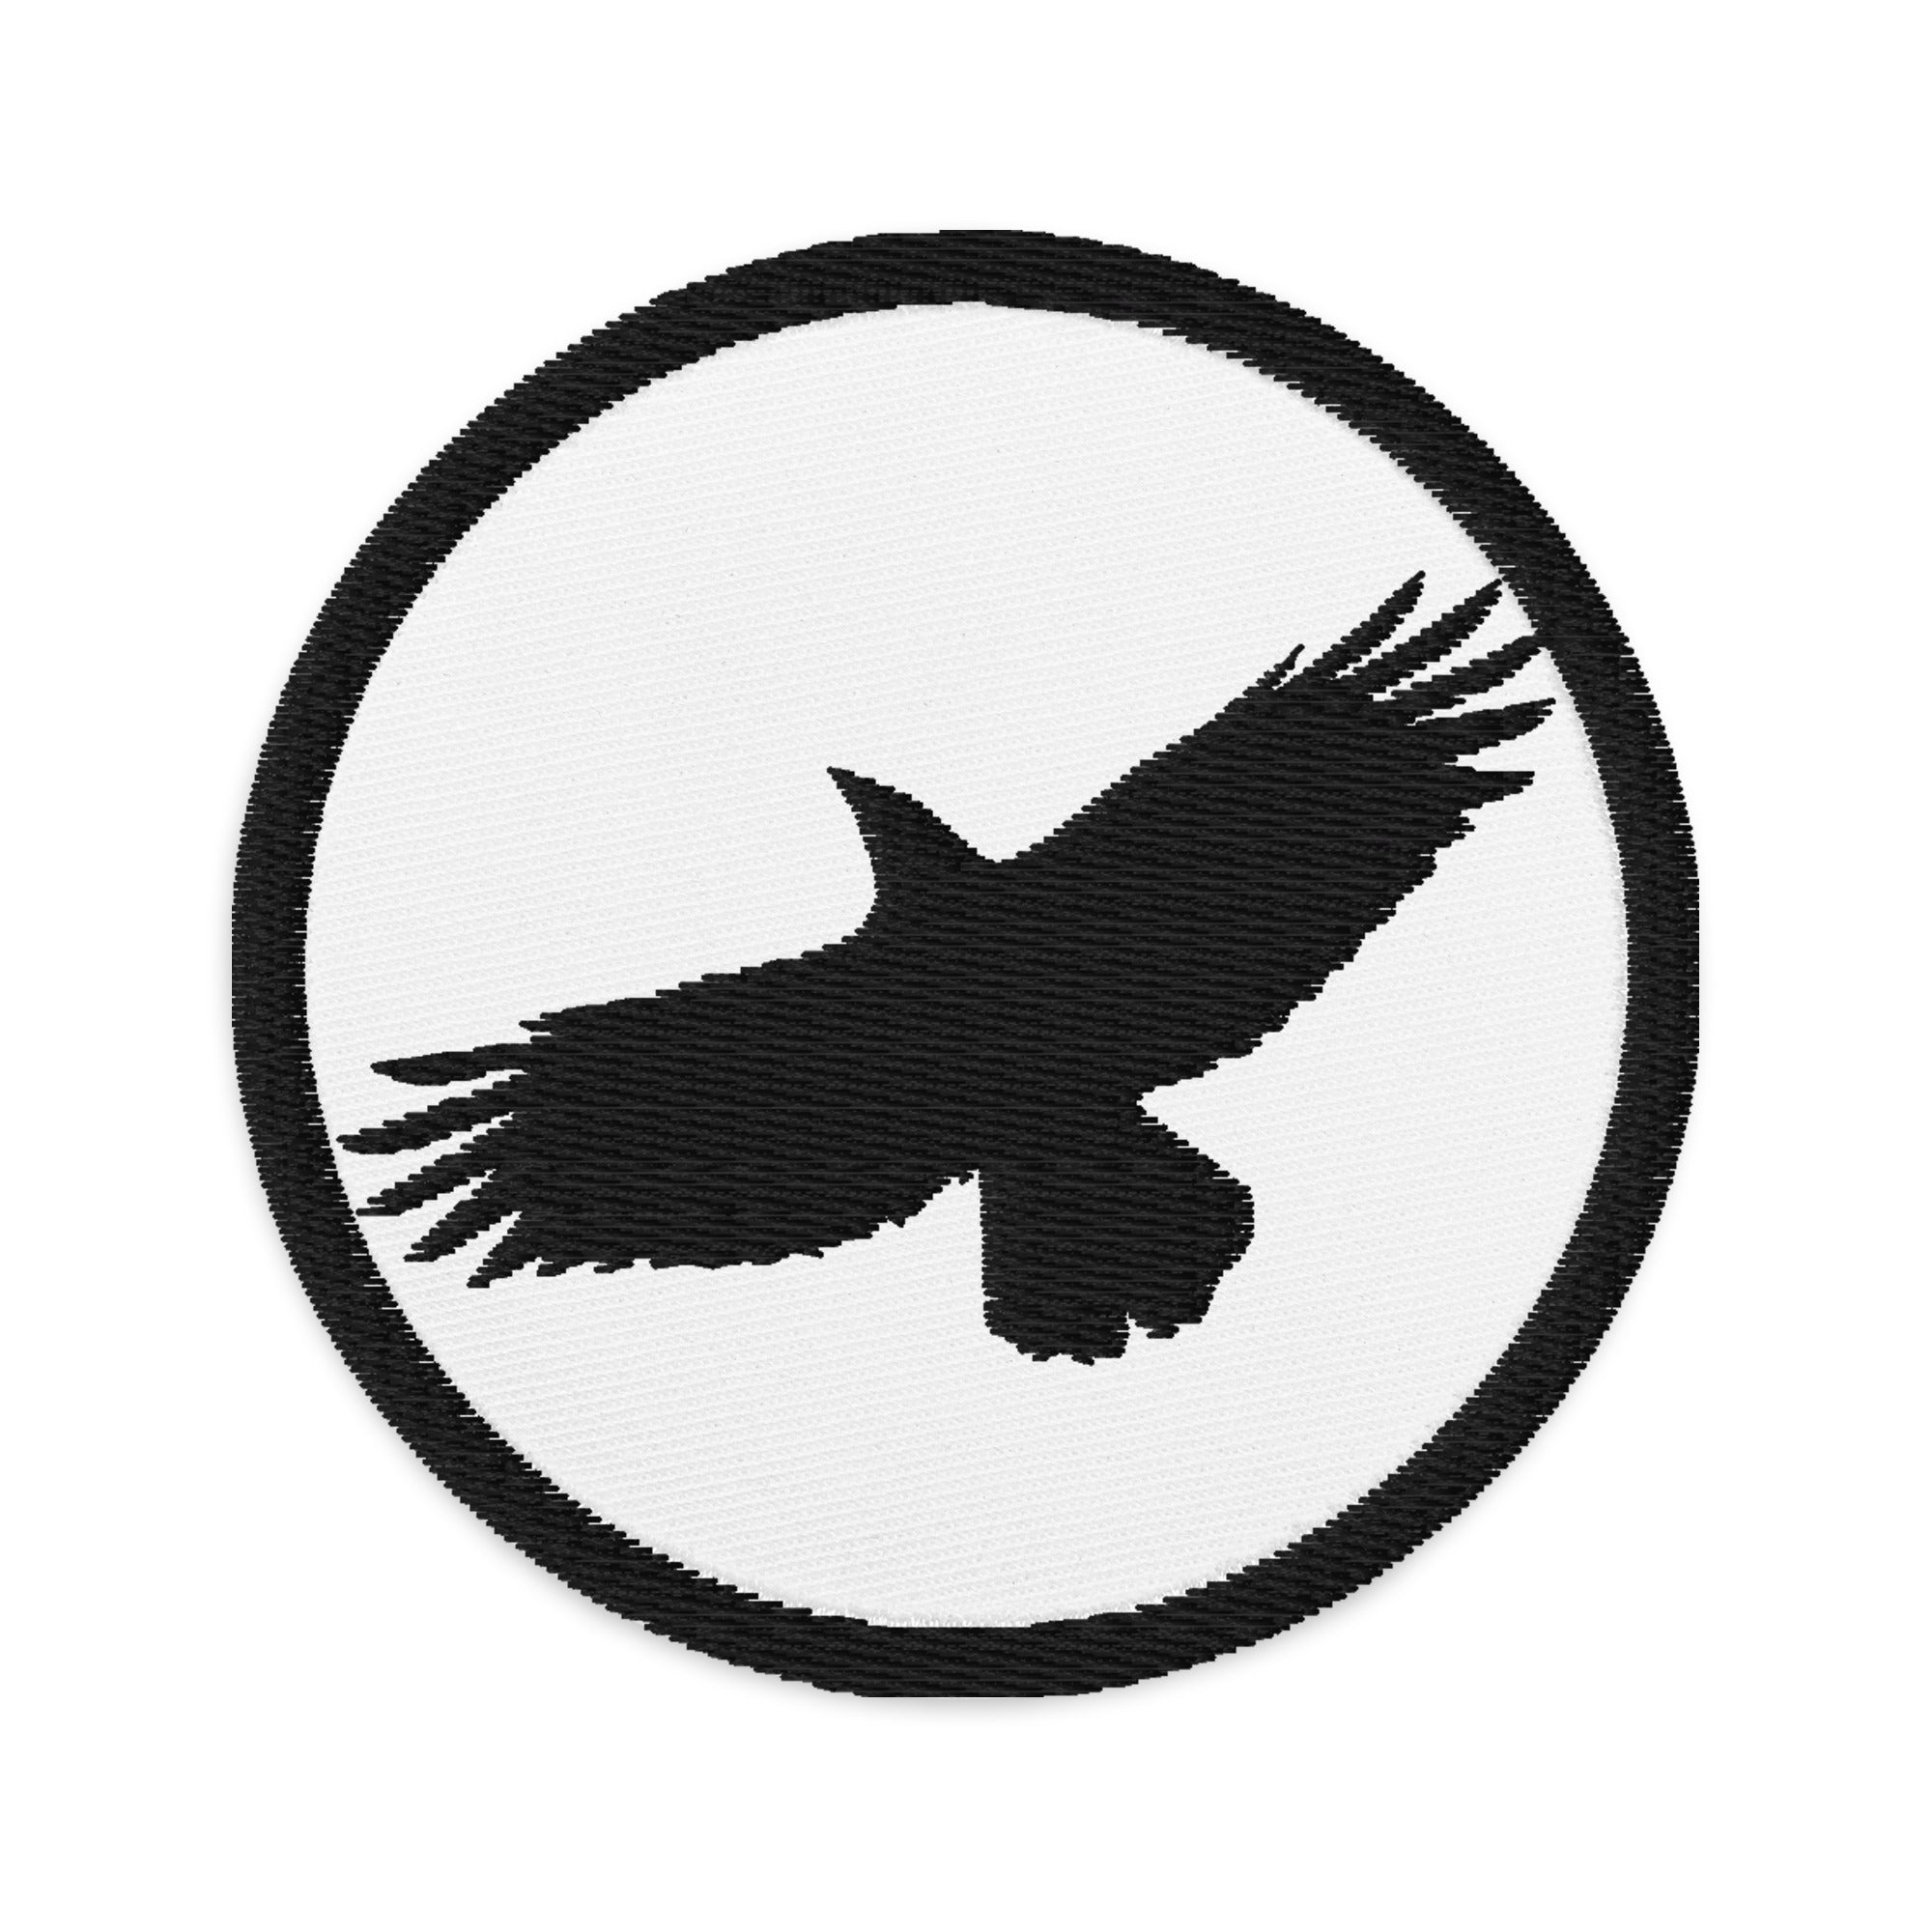 Flying Raven Black Bird Embroidered Patch - Edge of Life Designs